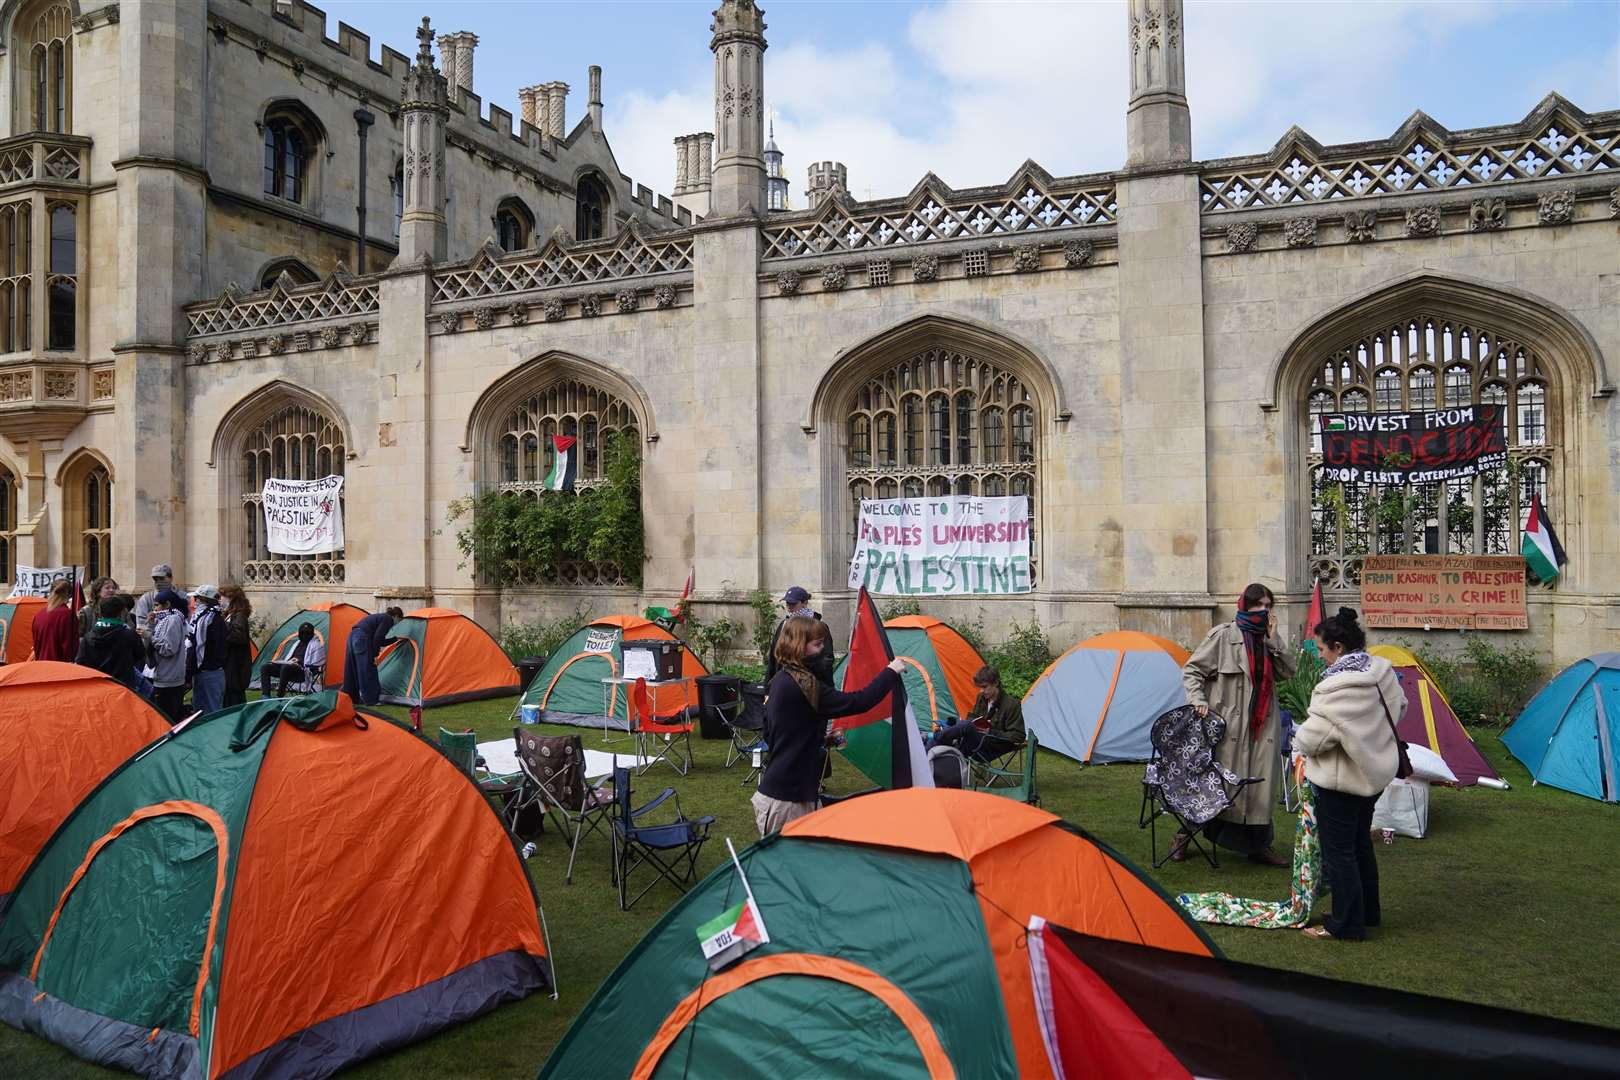 Students at an encampment on the grounds of Cambridge University, protesting against the war in Gaza (Joe Giddens/PA)